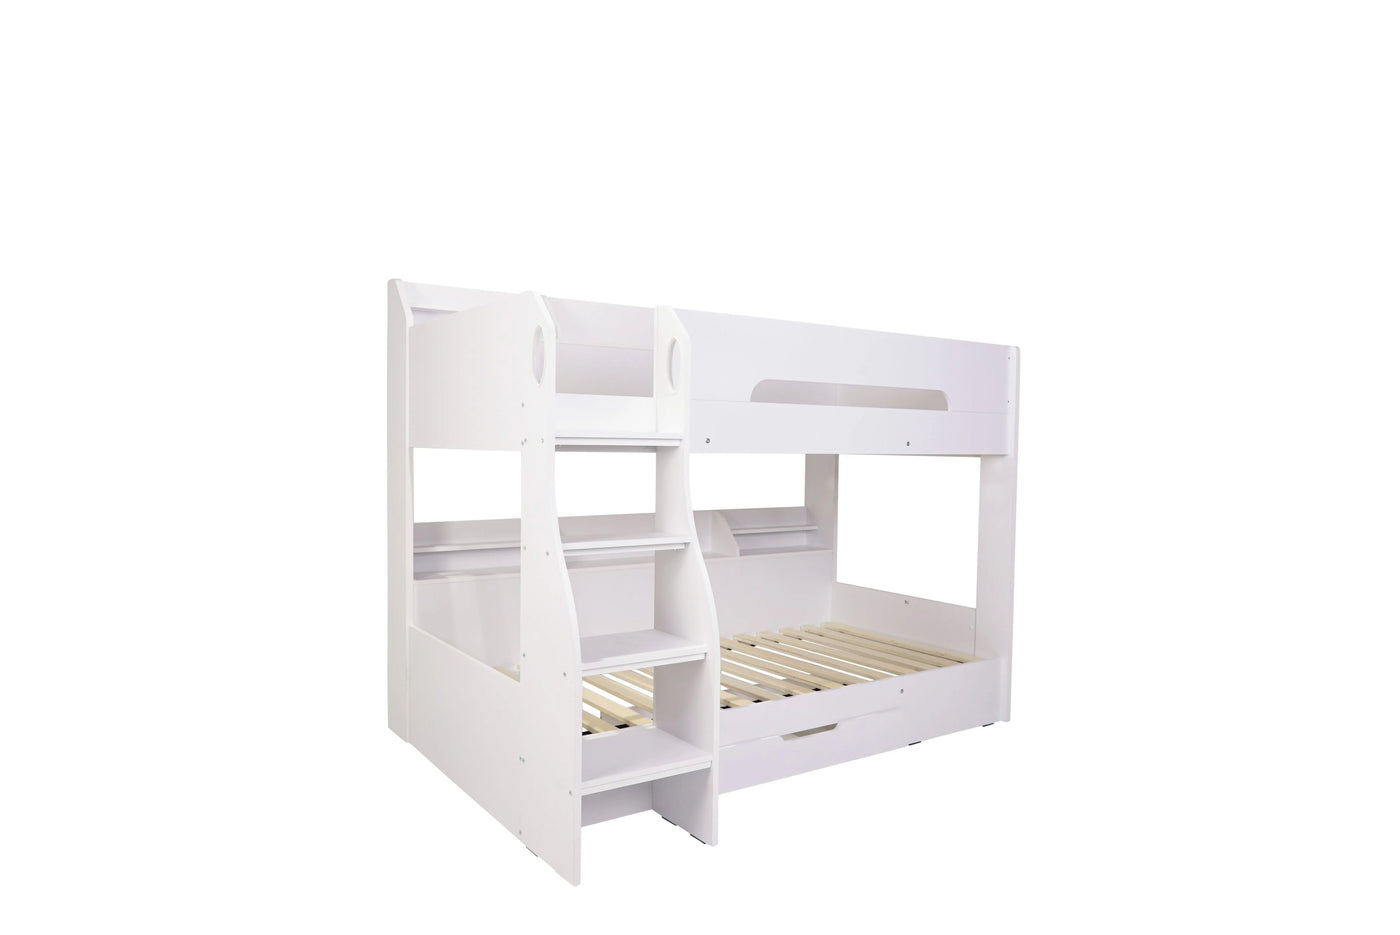 Flair-Flick-Bunk-Bed-In-White-8